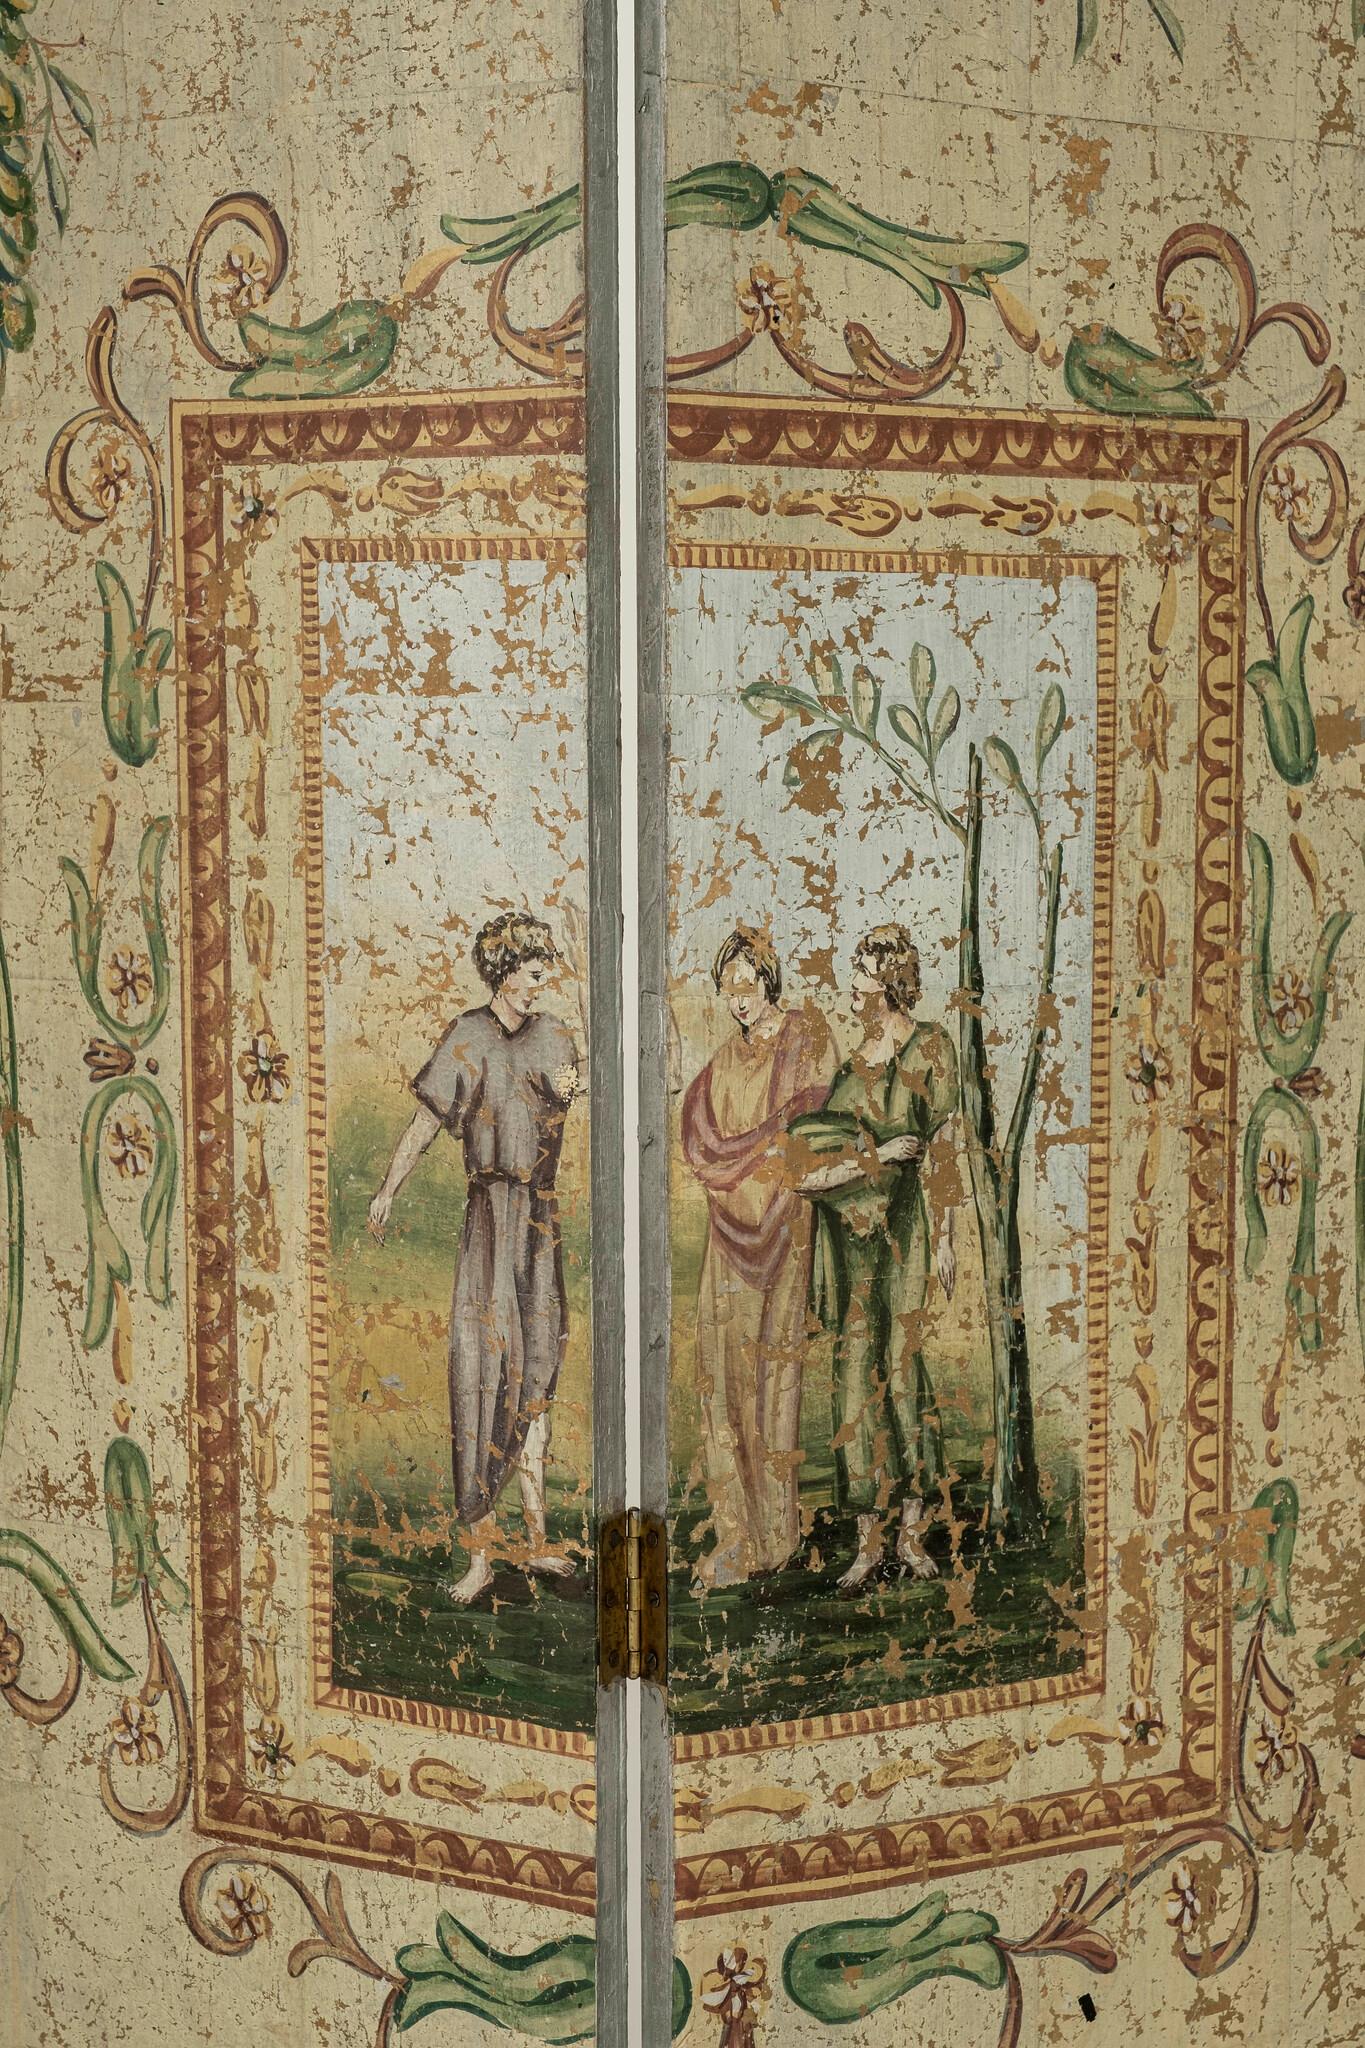 This six-panel screen borrows from the Roman practice as an homage to the great designers that came before. Ancient roman courtyard houses typically had architectural elements crown molding, paneling, and windows painted inside. This gave the home